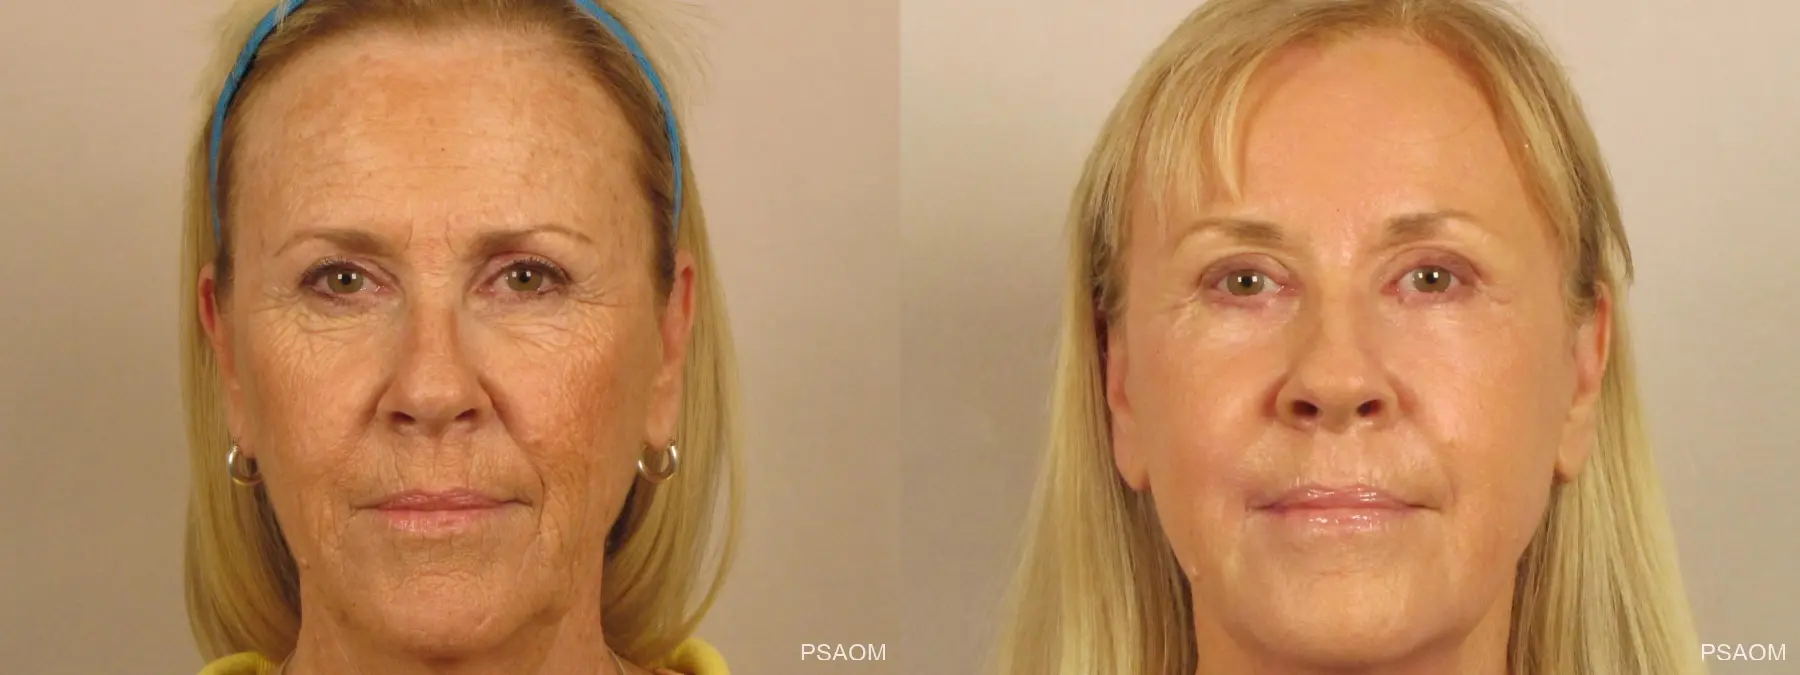 Laser Skin Resurfacing - Face: Patient 1 - Before and After 1